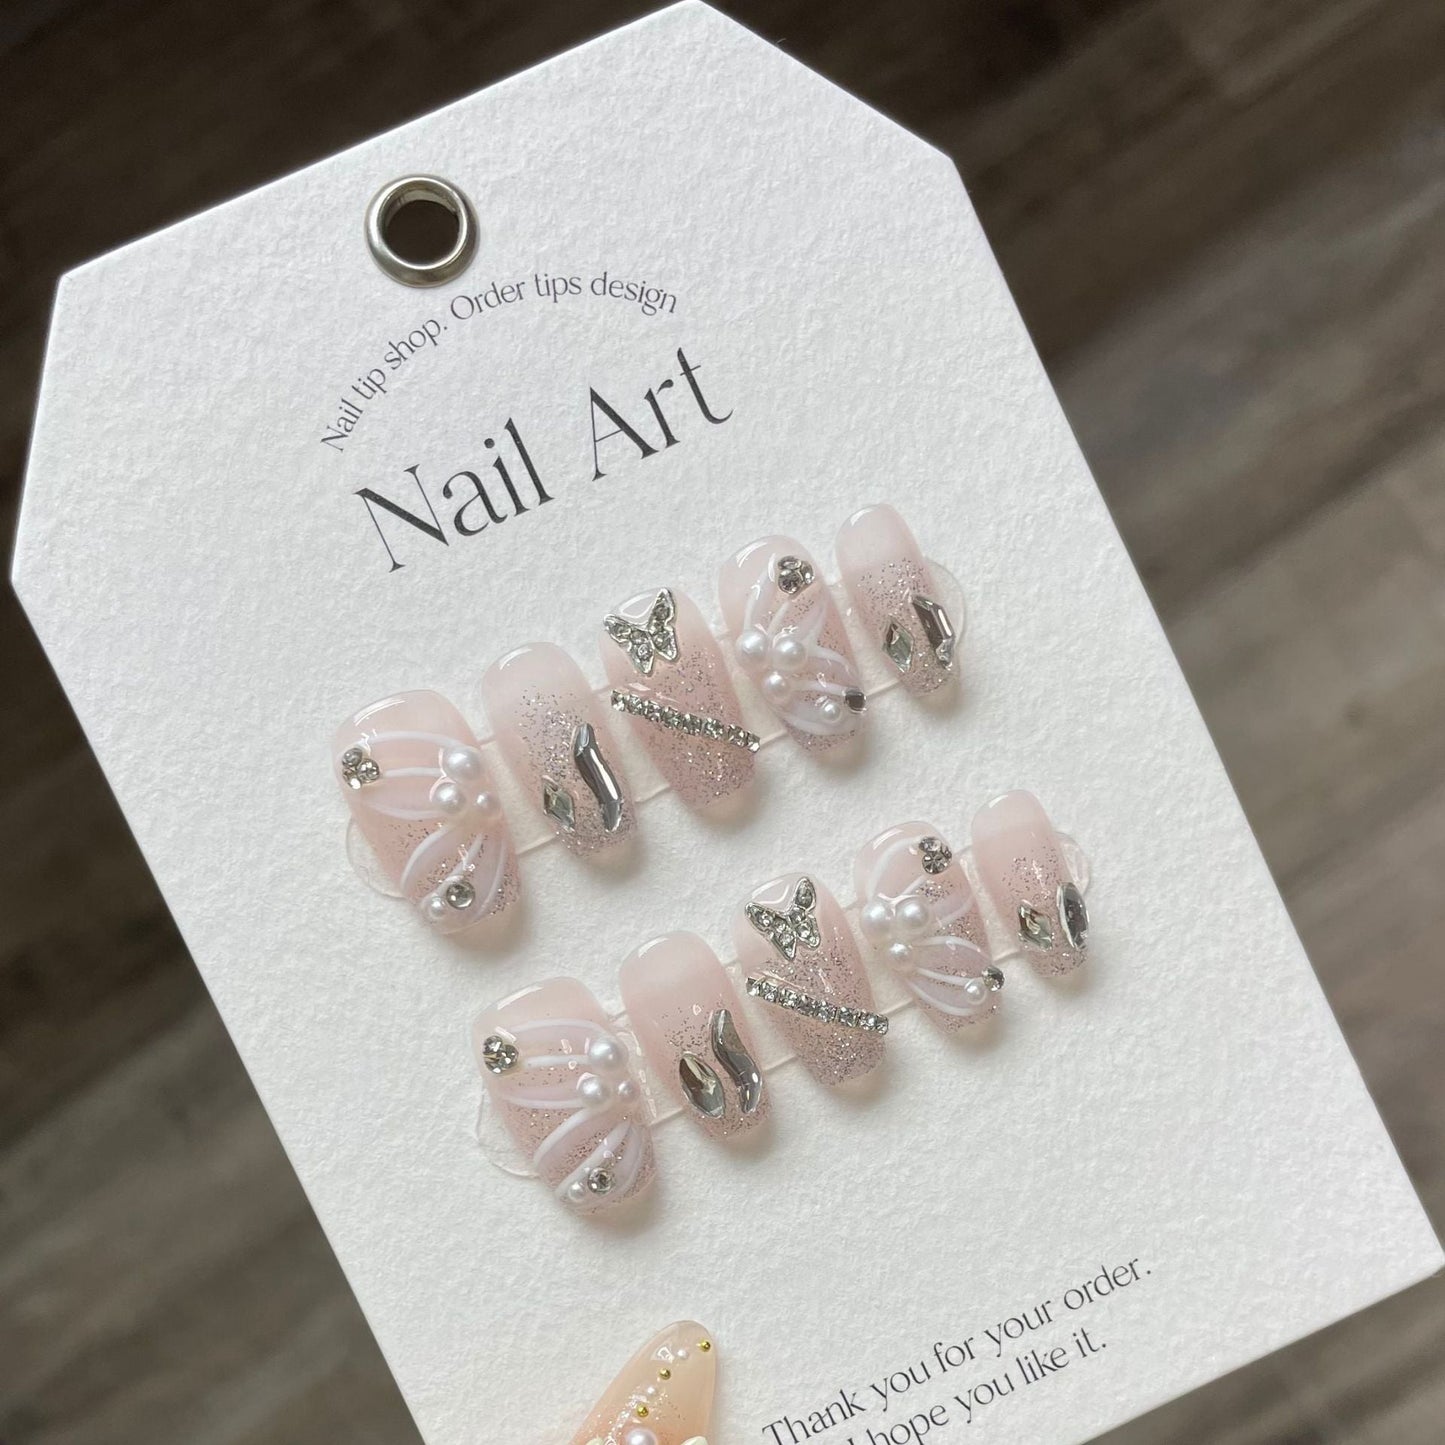 933/935/938 butterfly style press on nails 100% handmade false nails pink